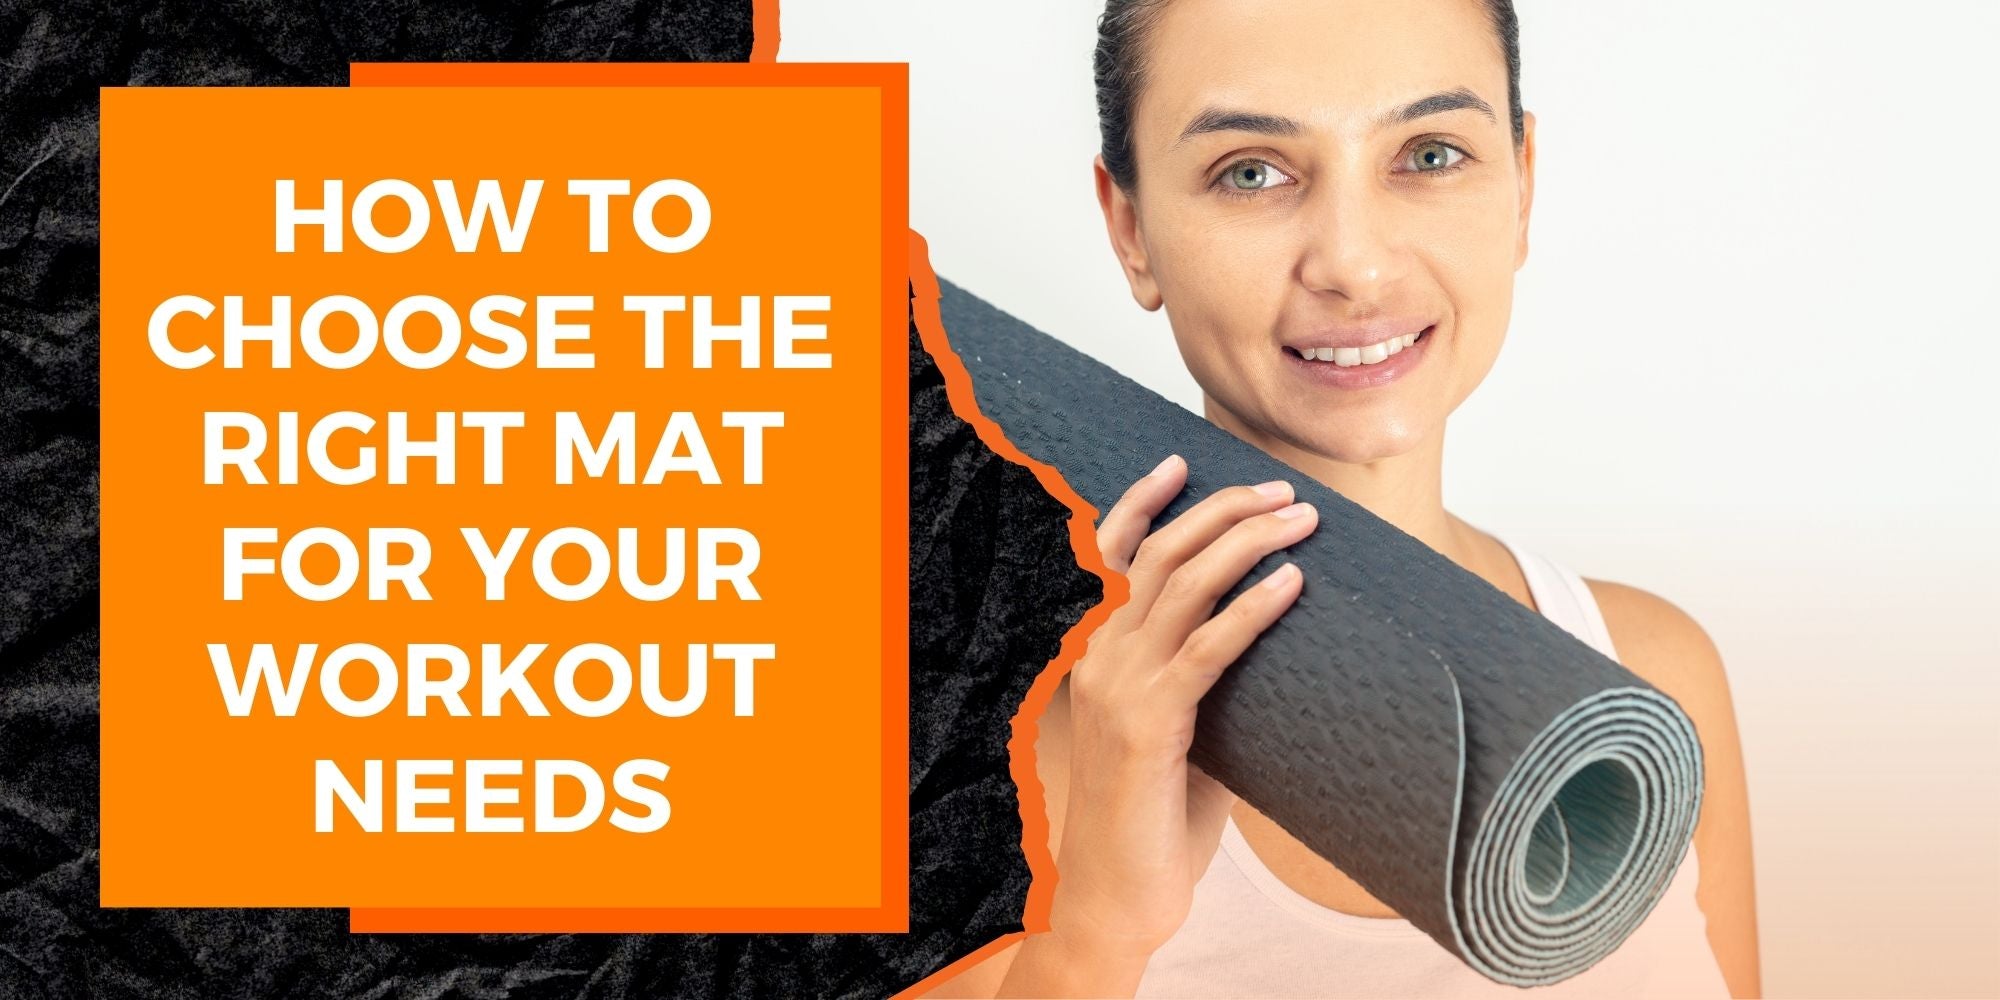 How to Choose the Right Exercise Mat for Your Workout Needs